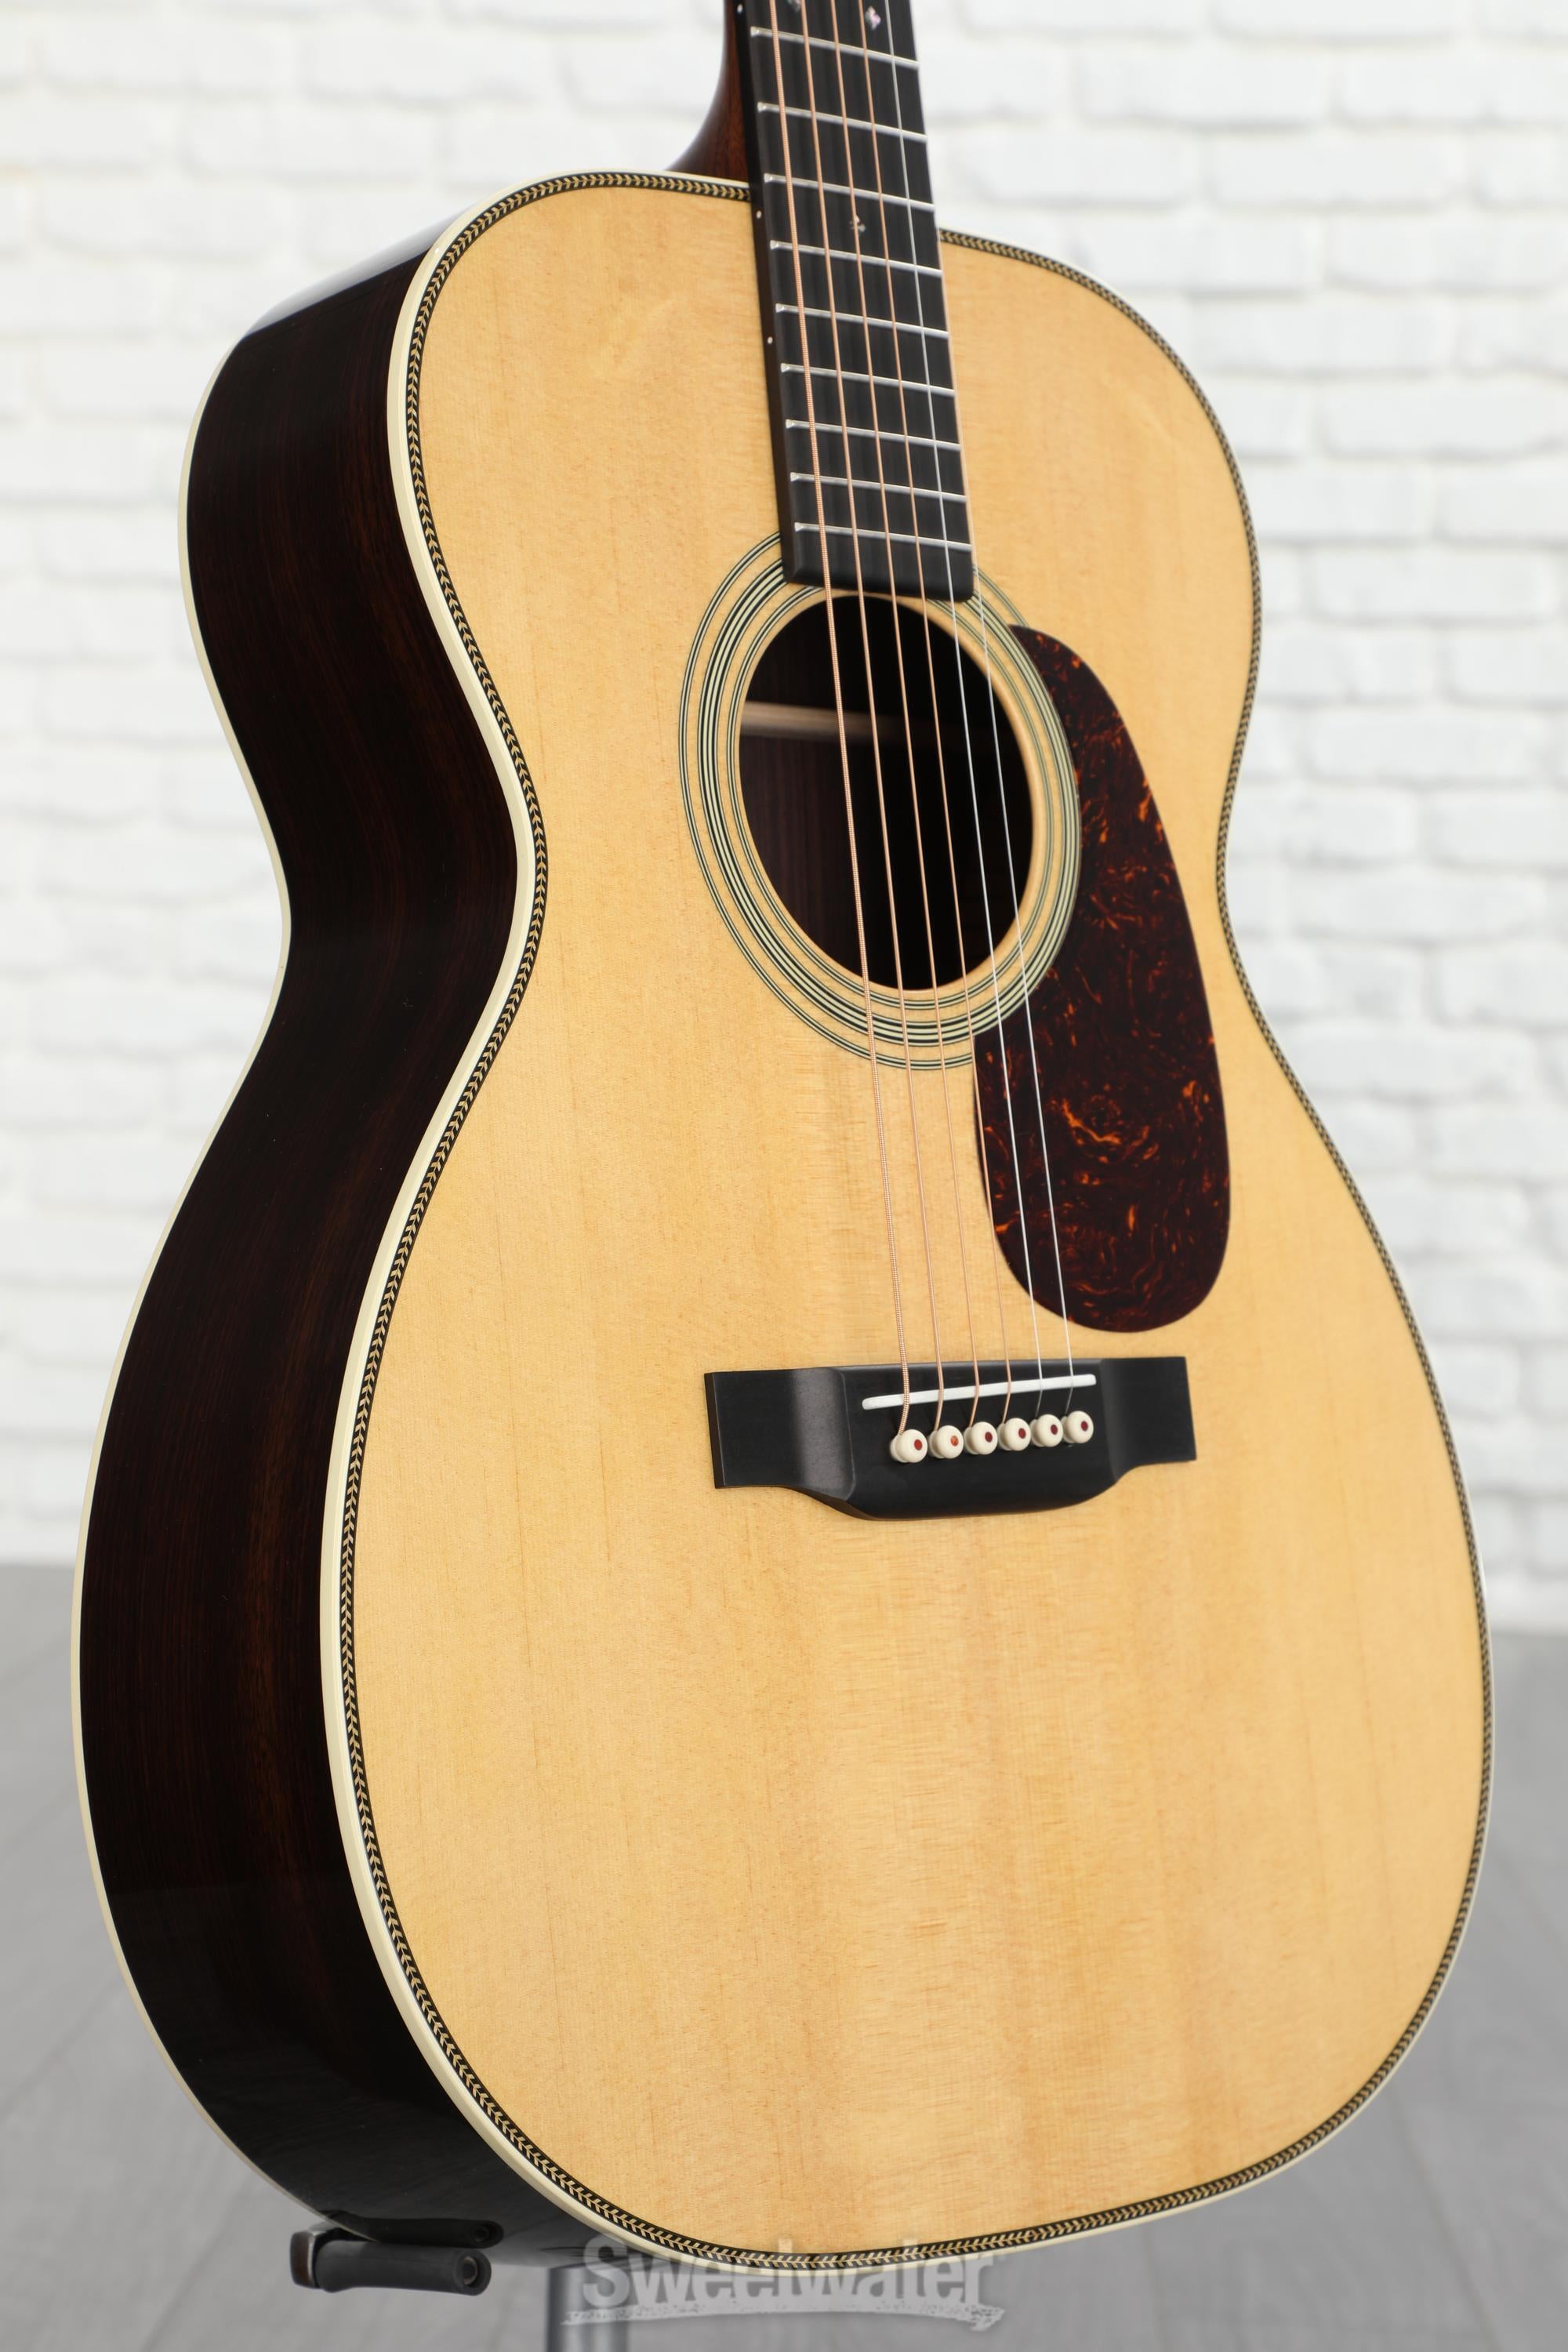 Martin 00-28 Acoustic Guitar - Natural | Sweetwater